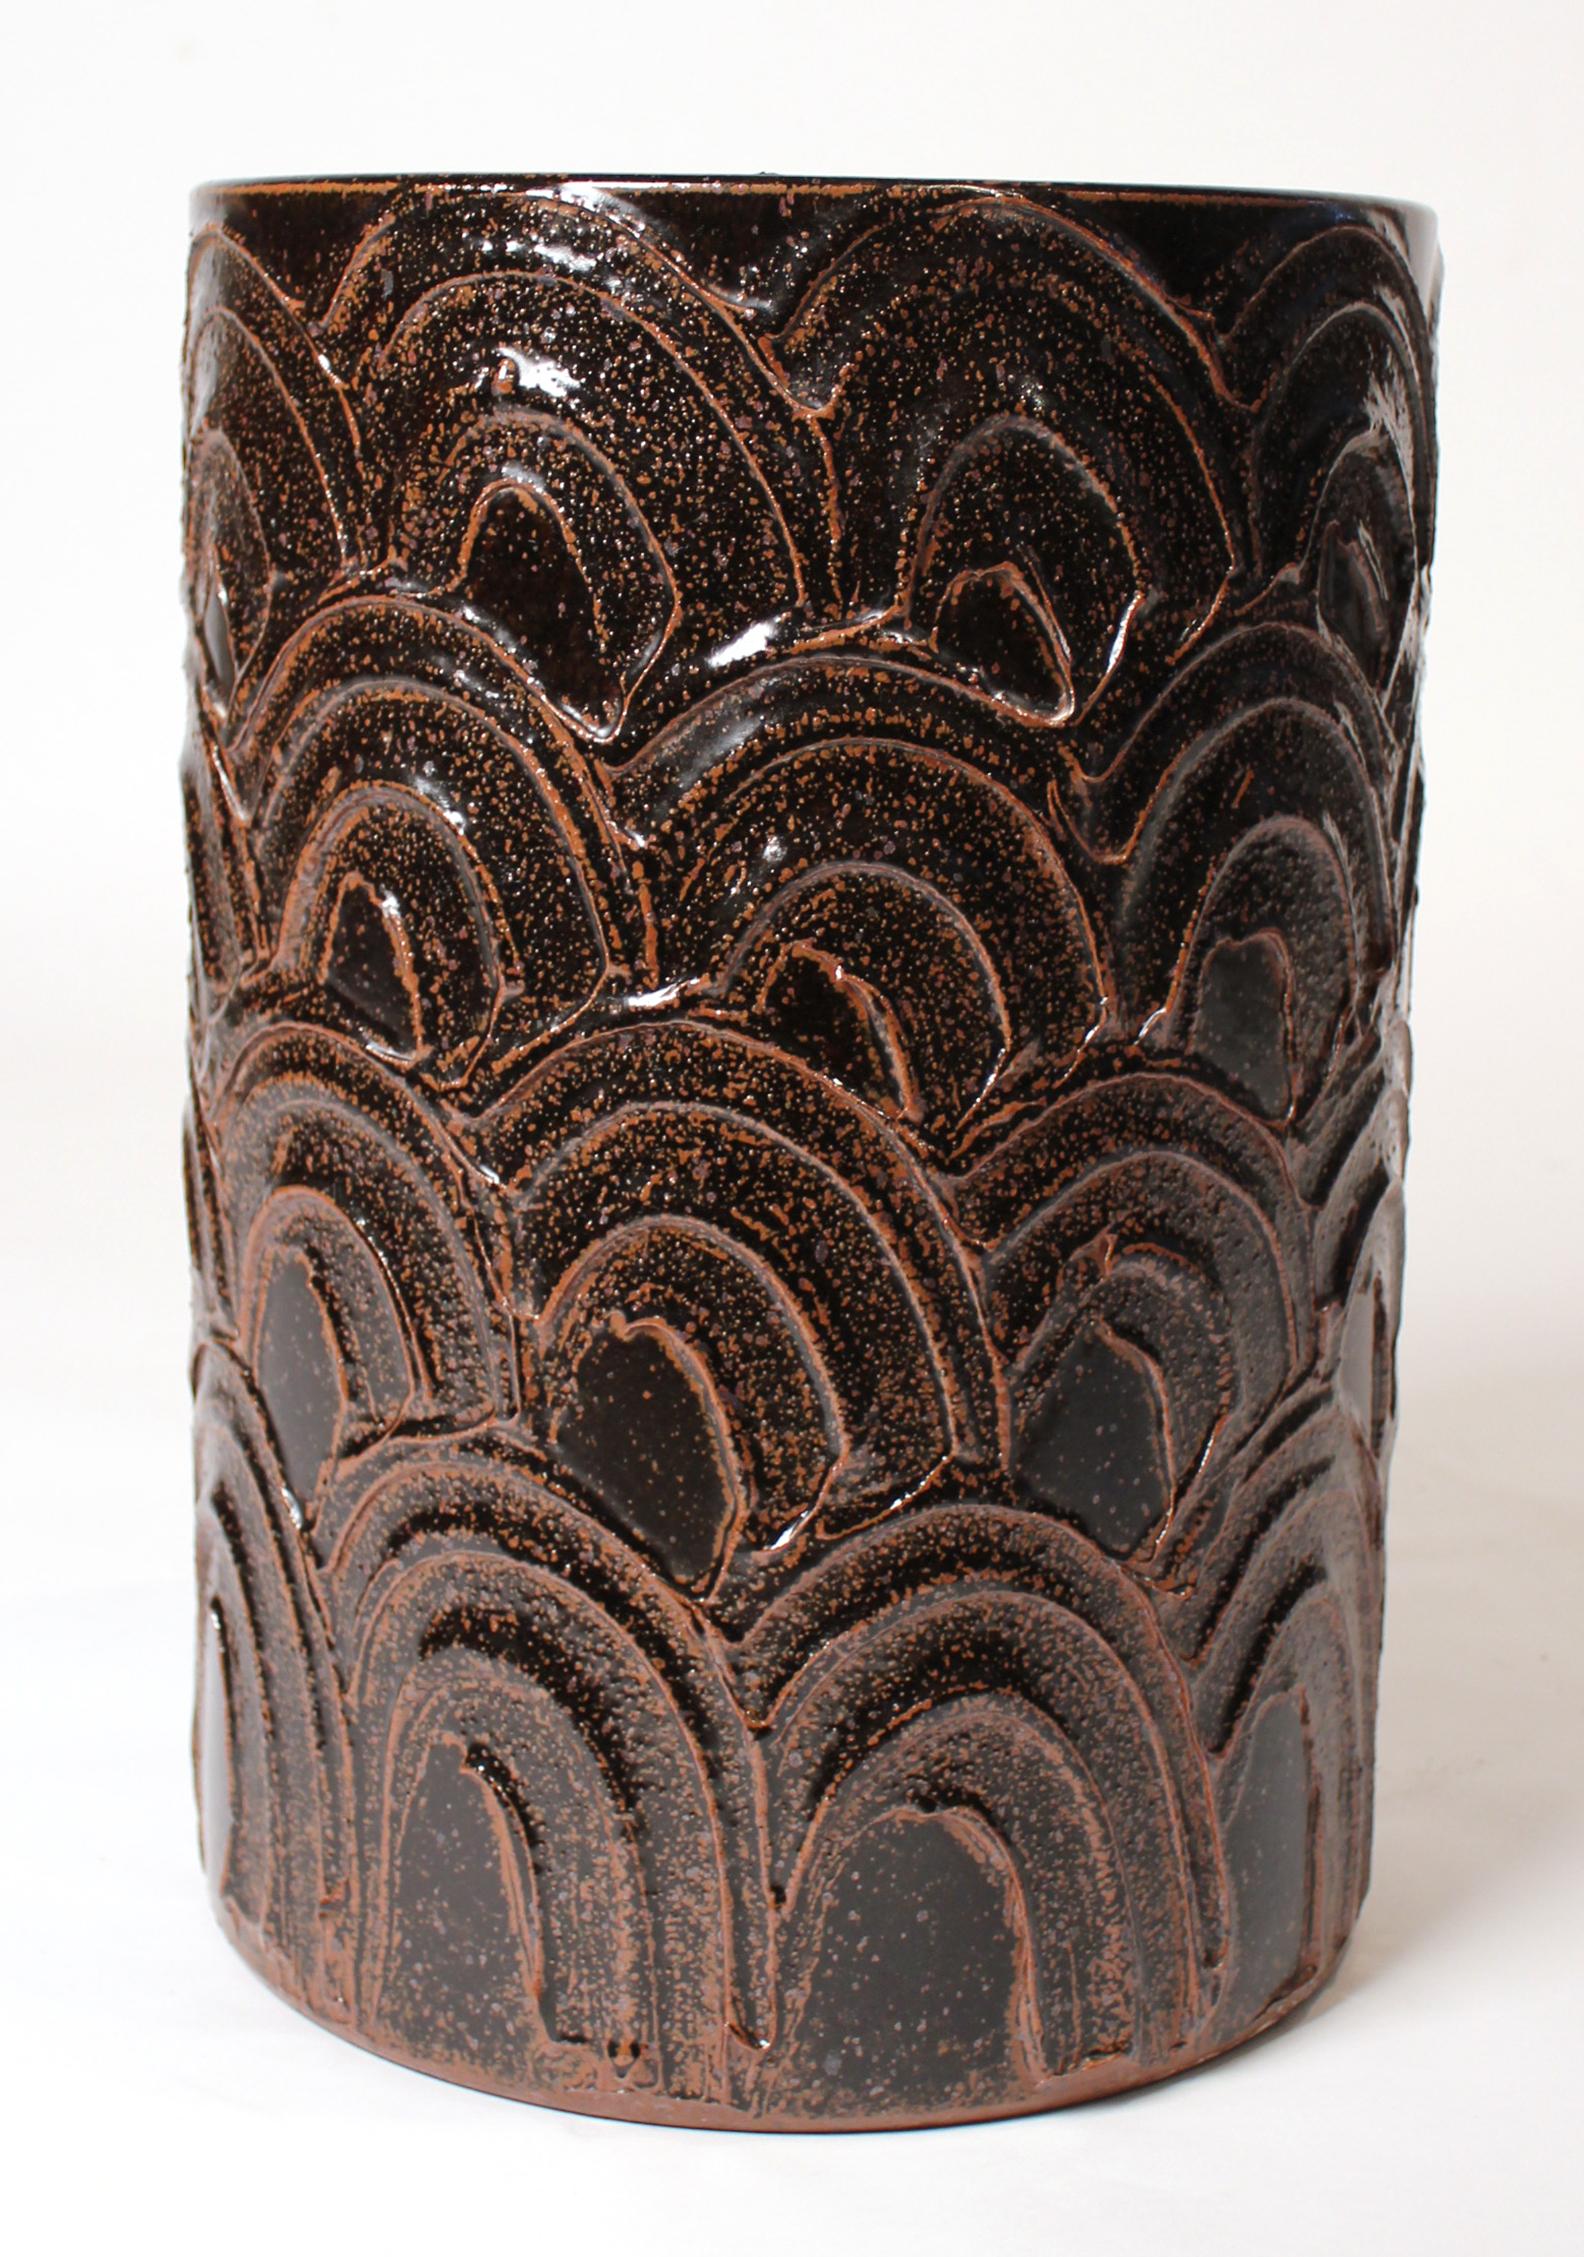 Rare and unusual 1960s David Cressey designed glazed ceramic vessel from the Pro-Artisan Series for Architectural Pottery. This example has the 'Terra Umbra' glaze and the 'Arcs' texture.